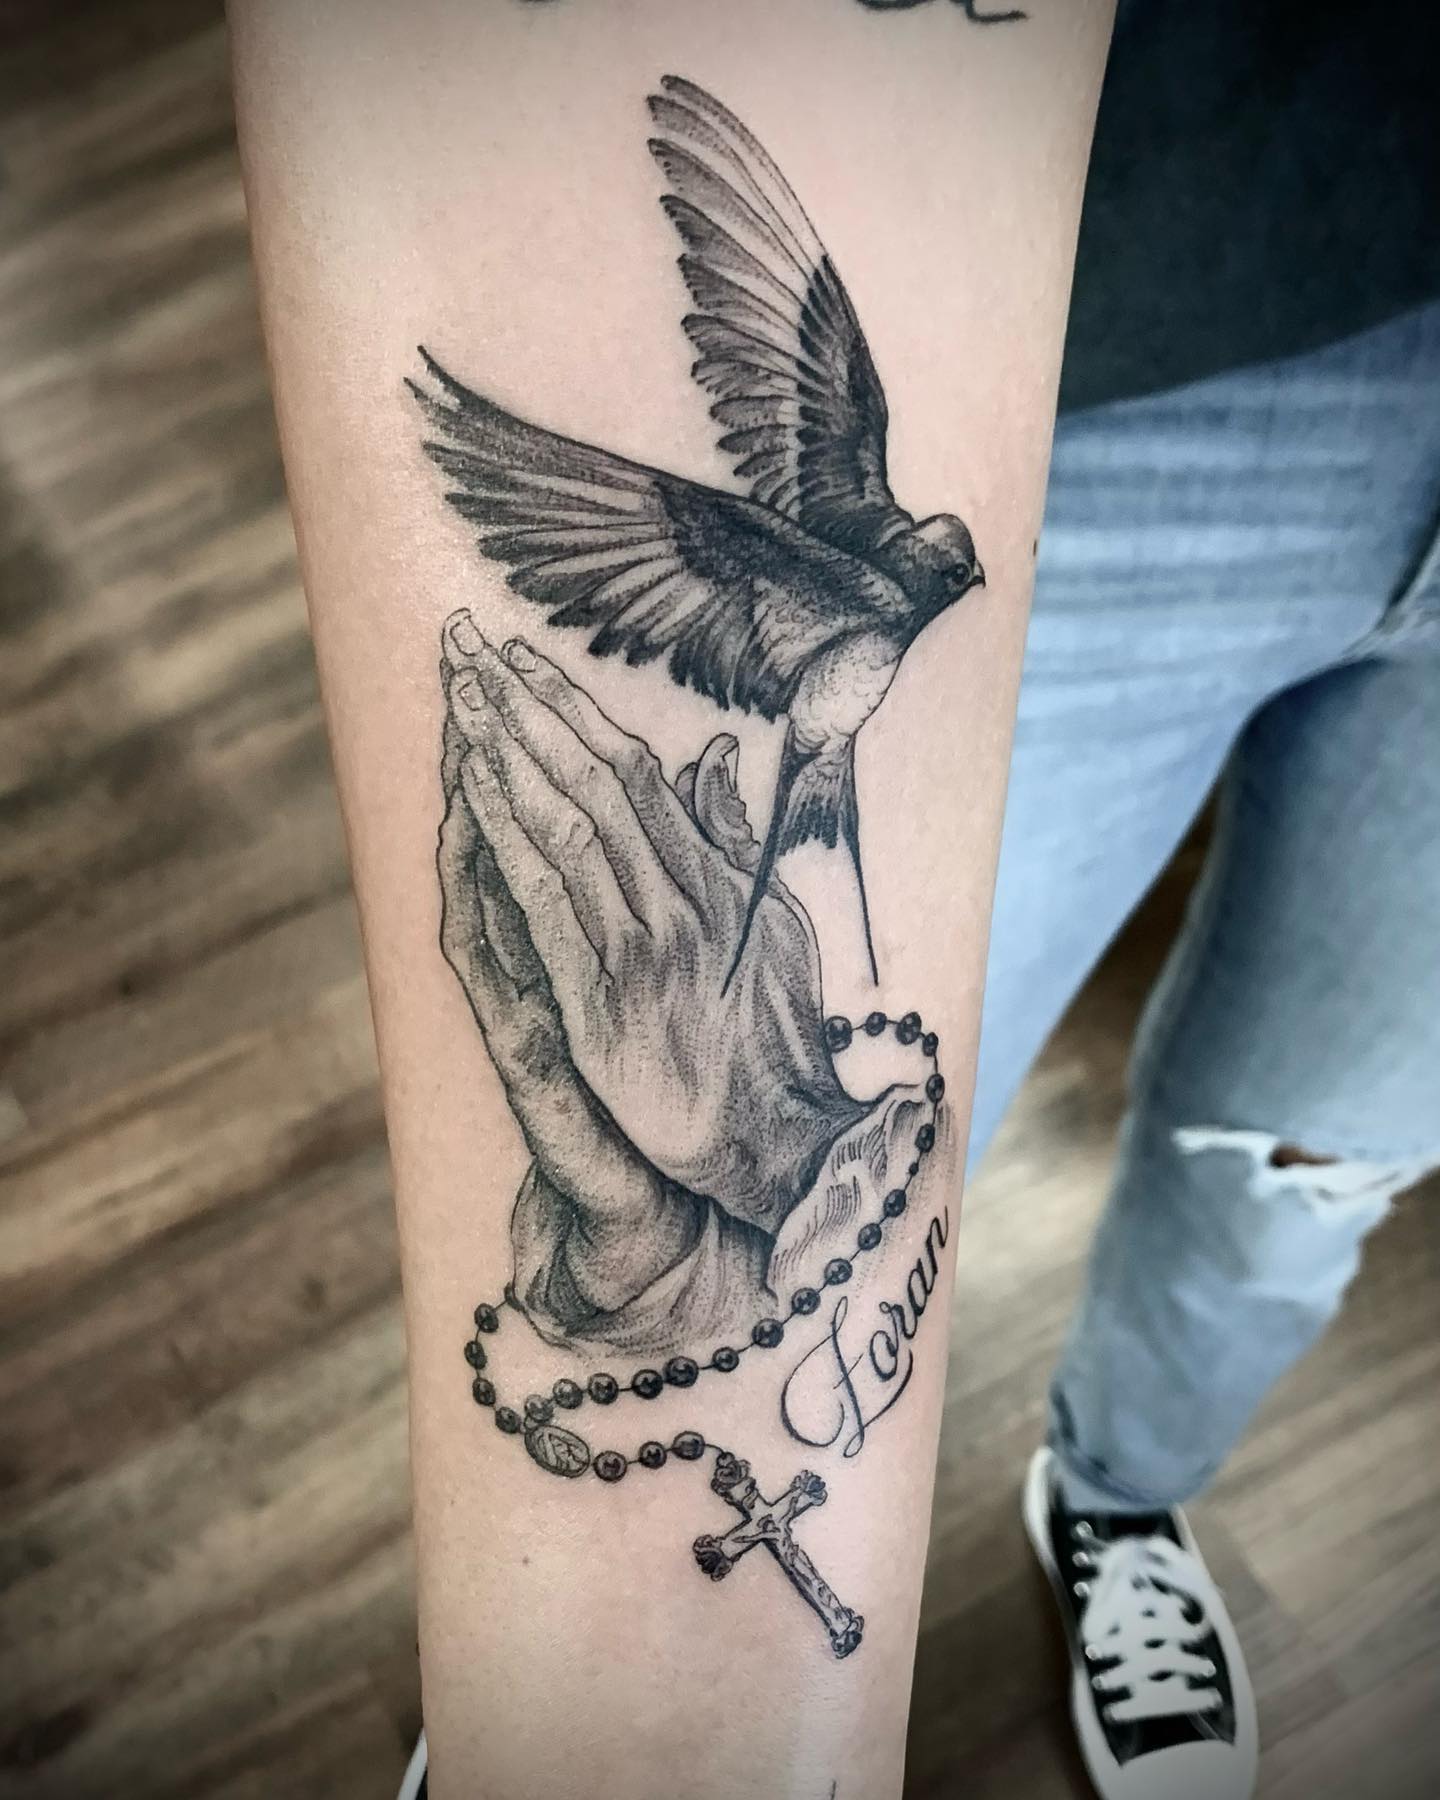 With that cute bird, this tattoo will stand out on your arm. Bird symbolizes freedom and peace, so it is quite matching with your praying hands.